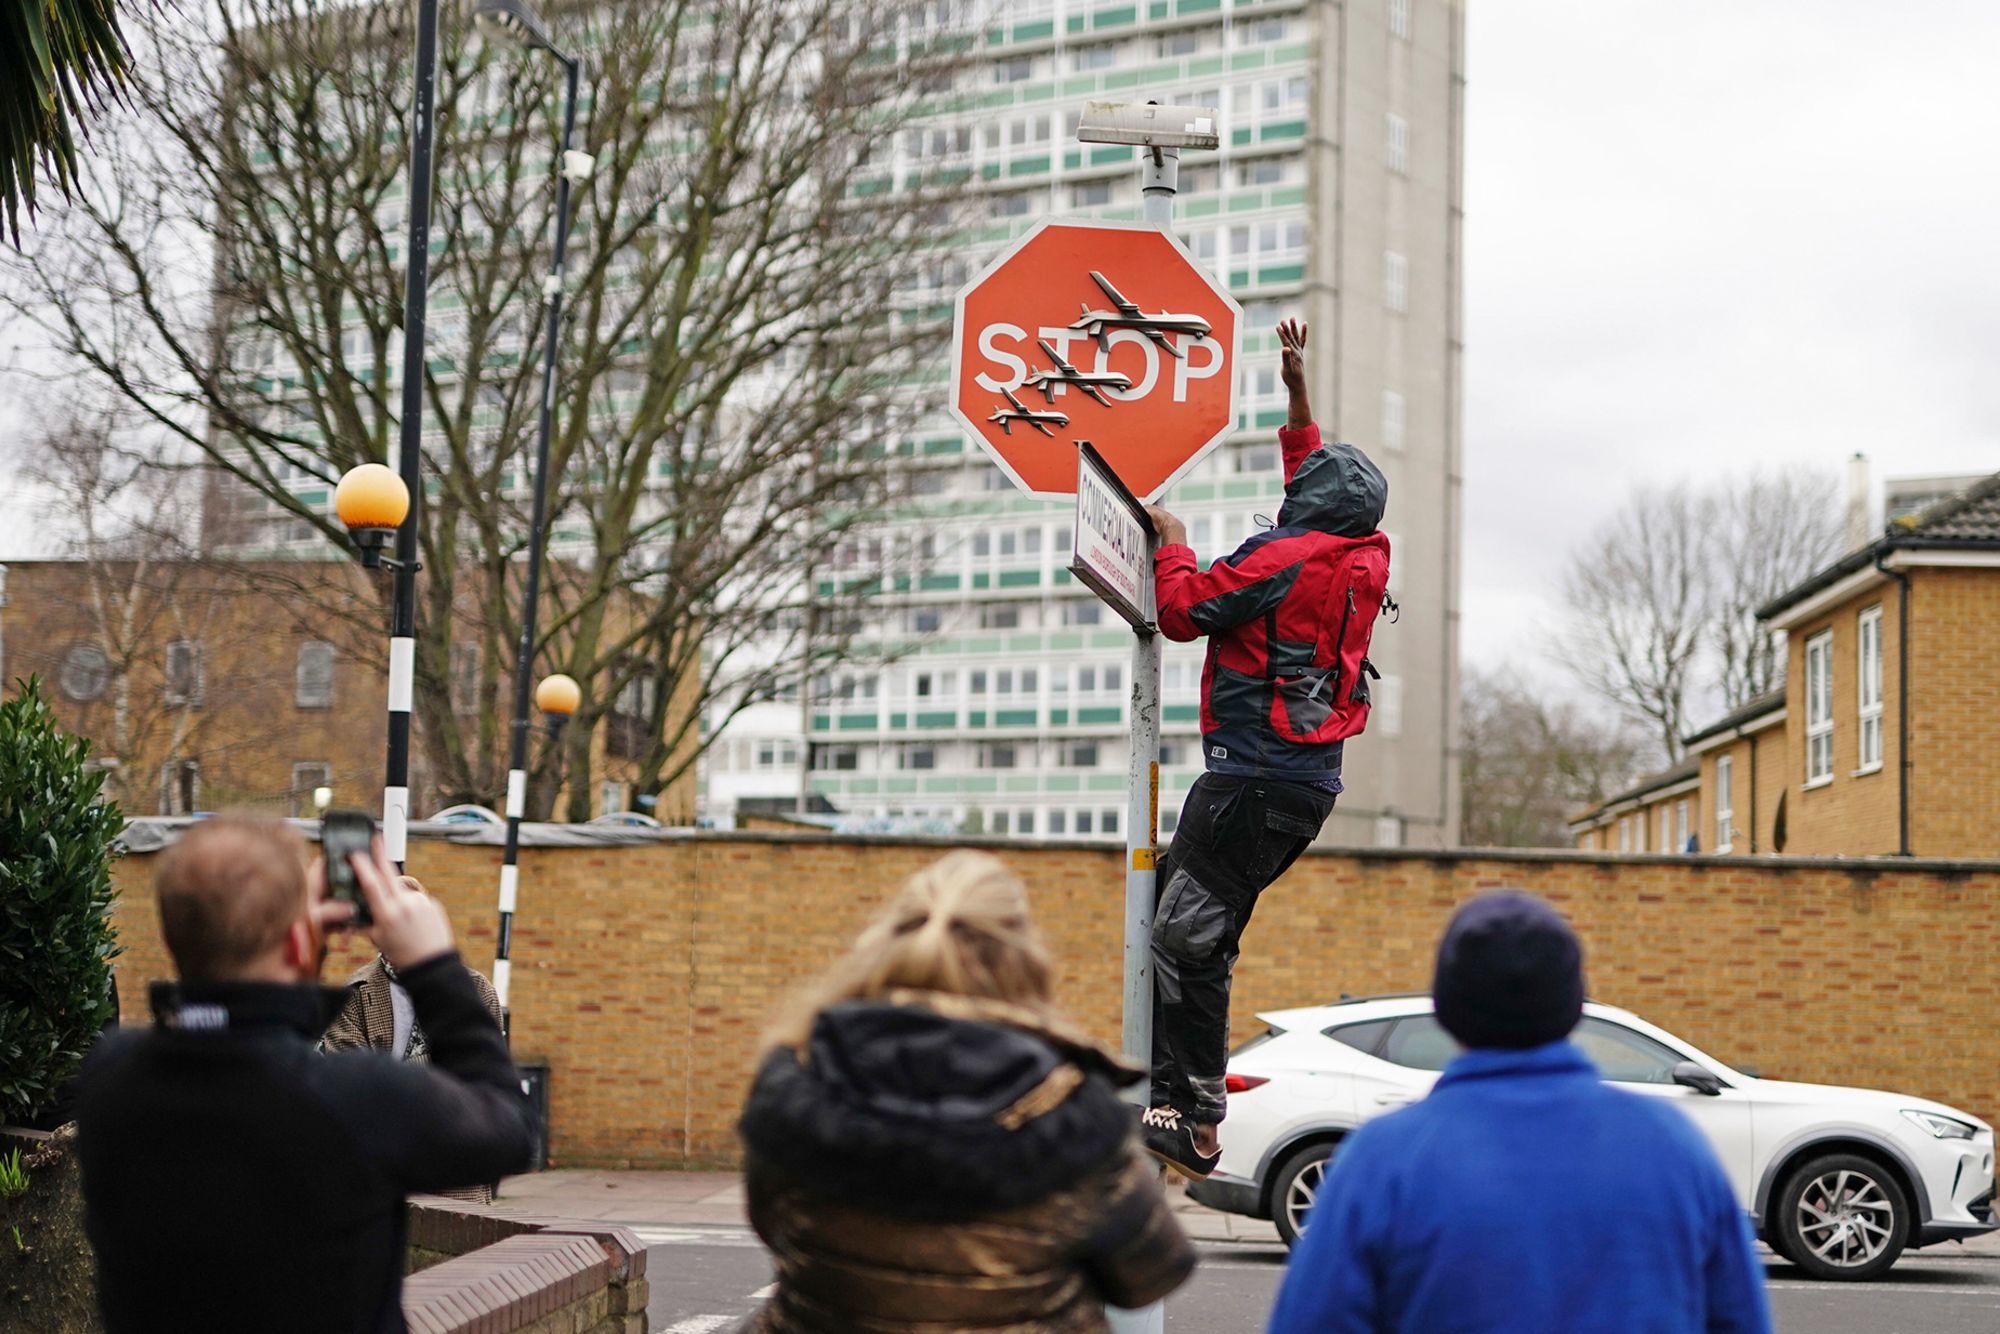 A man is pictured removing a Banksy artwork from a street in south London.